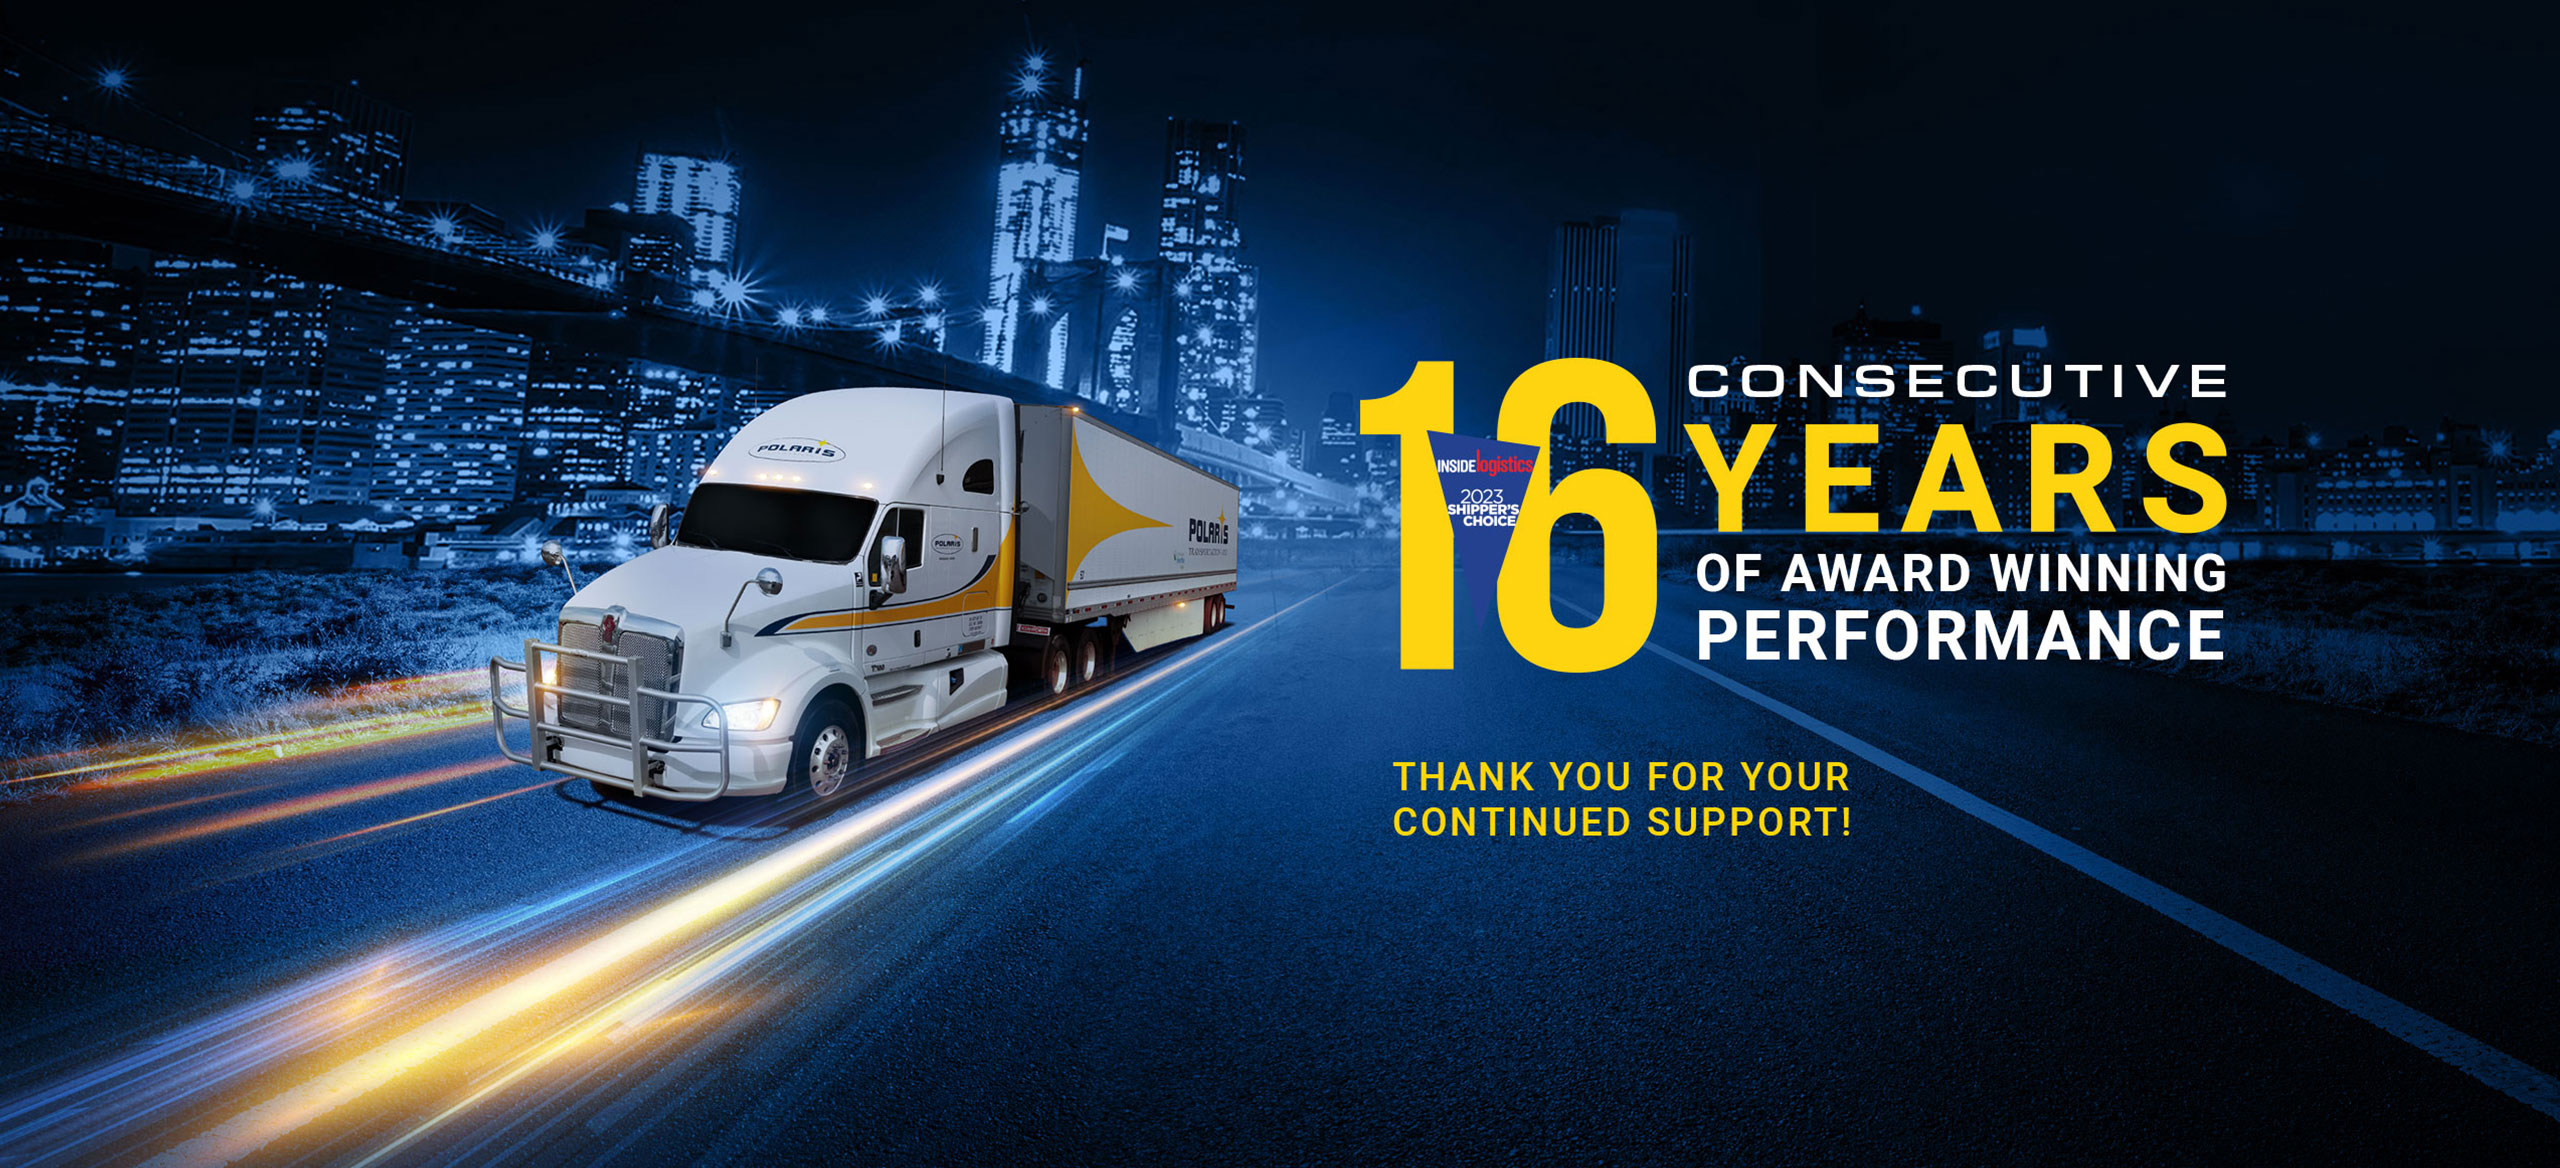 Polaris truck driving in city with overlaid announcement for 16 consecutive years as Shipper's Choice Award winners